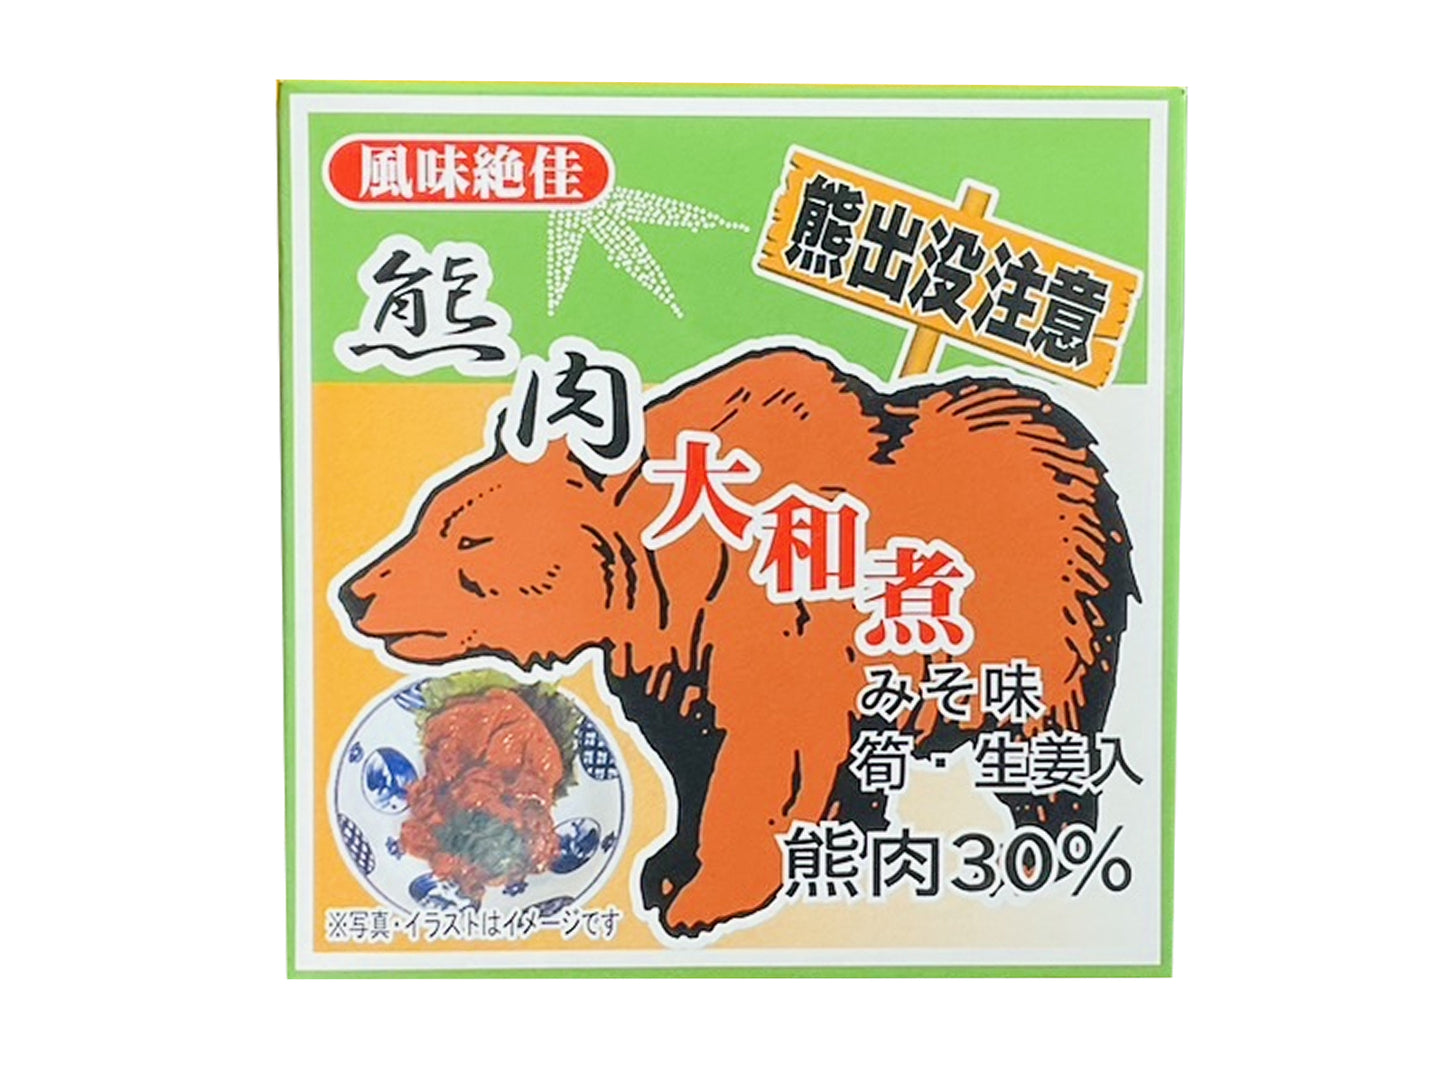 Bear meat Yamato boiled can